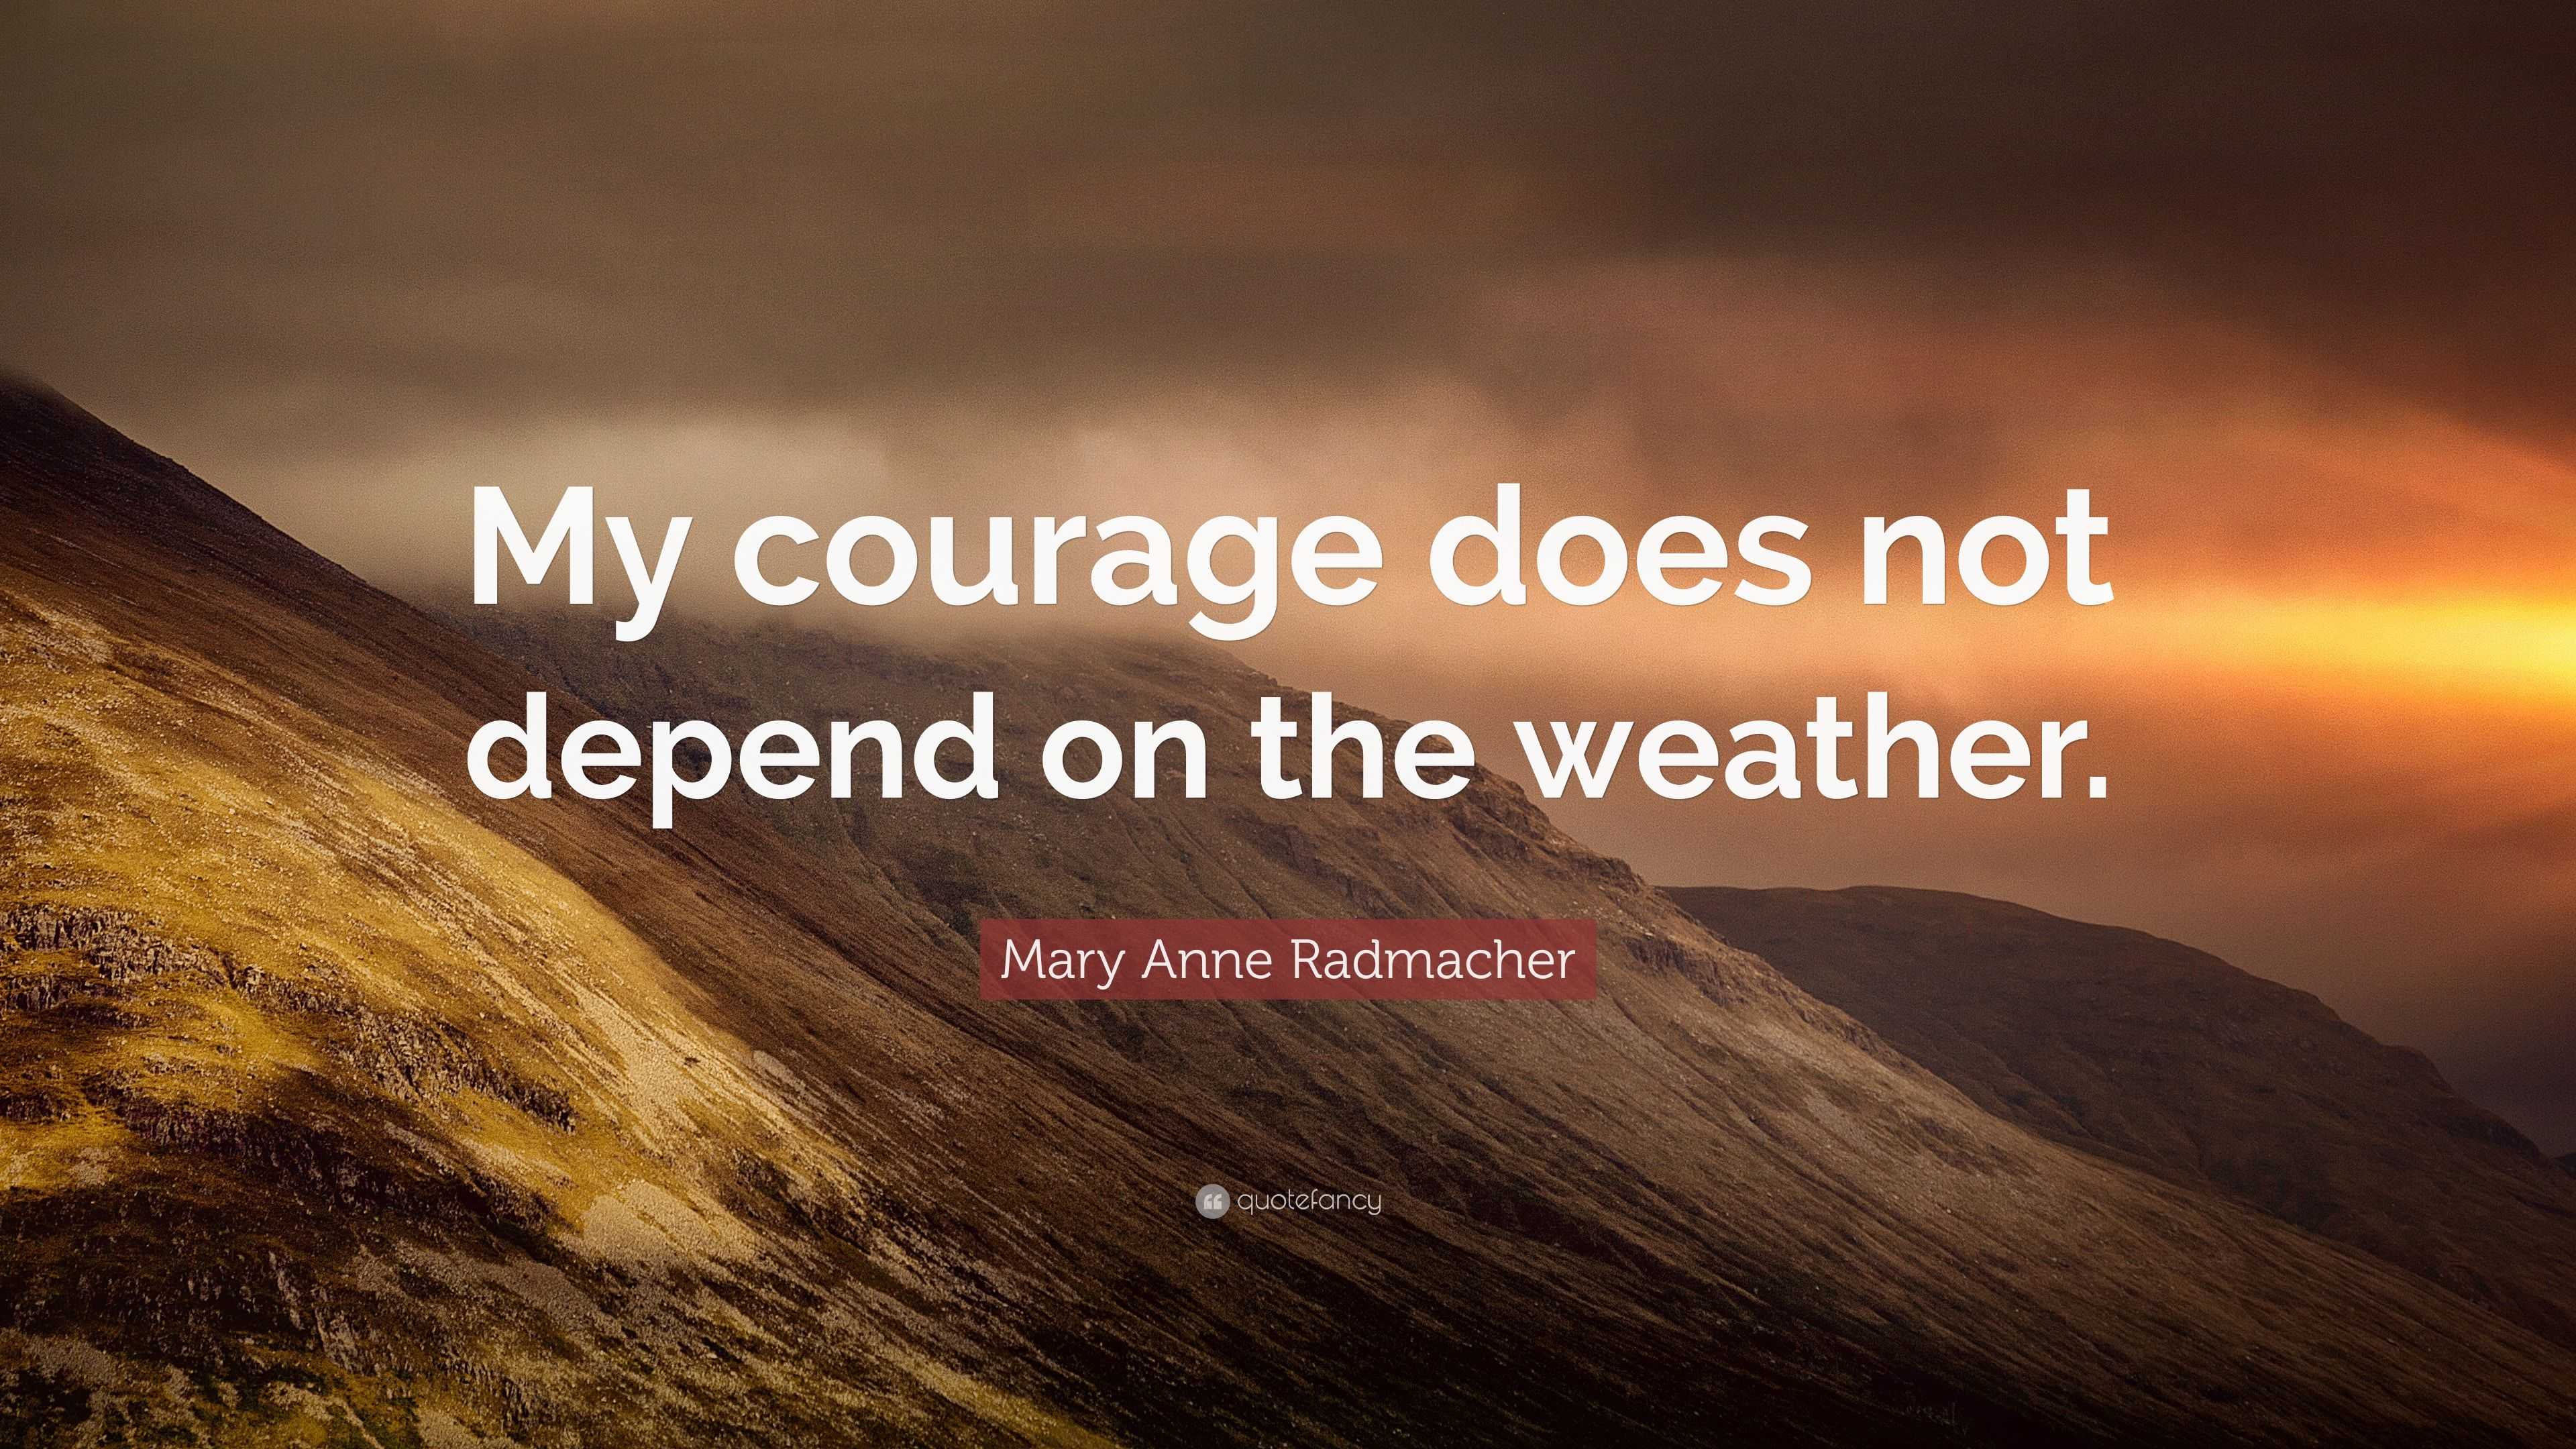 Mary Anne Radmacher Quote “my Courage Does Not Depend On The Weather”